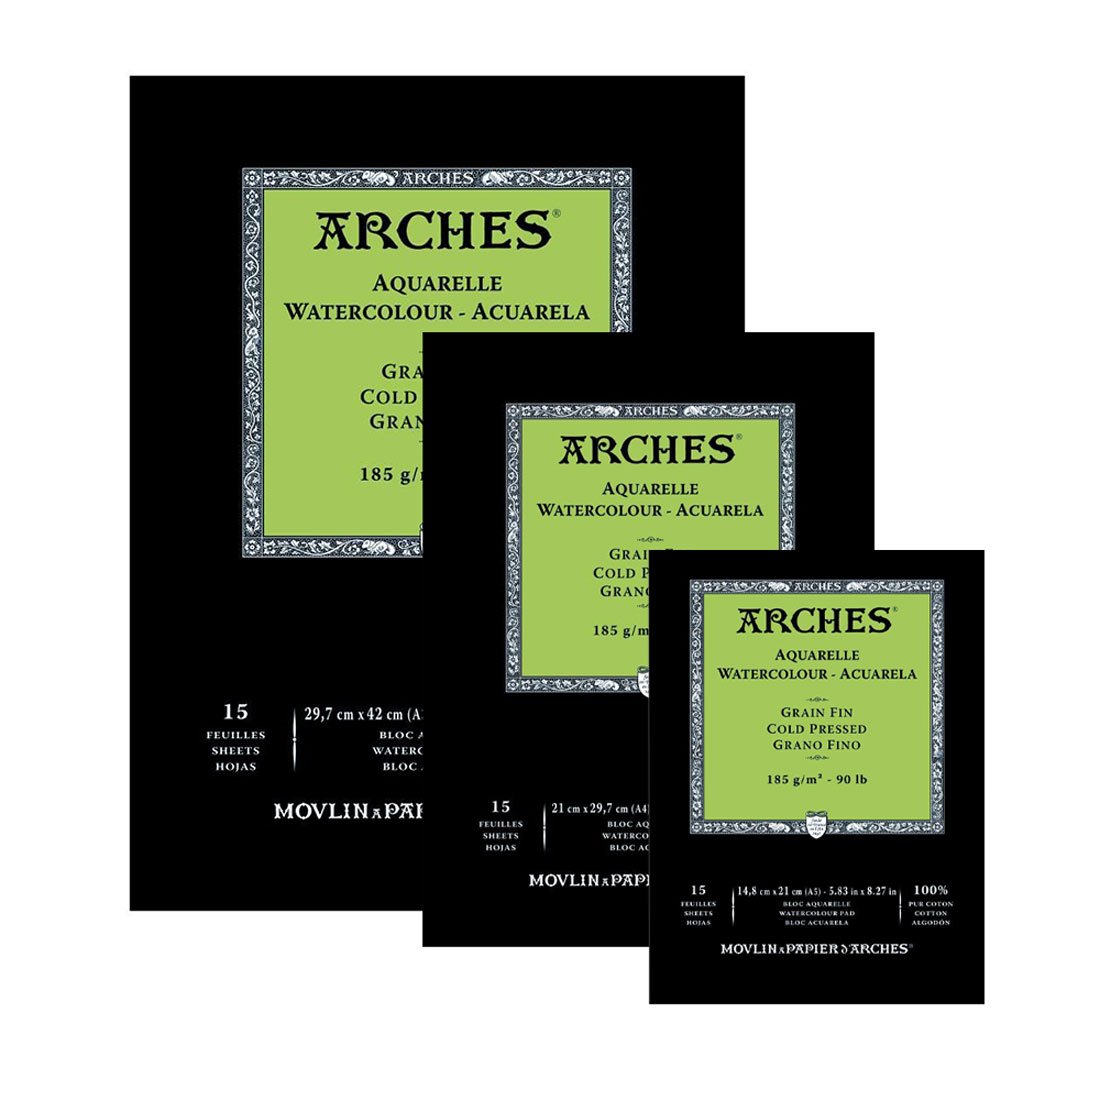 Arches Cold Pressed 185gsm Watercolour Pads are available in-store and online at The Paintbox, home of the widest range of traditional and progressive Art Supplies in Adelaide. At The PaintBox we source and stock quality art supplies which we import directly.